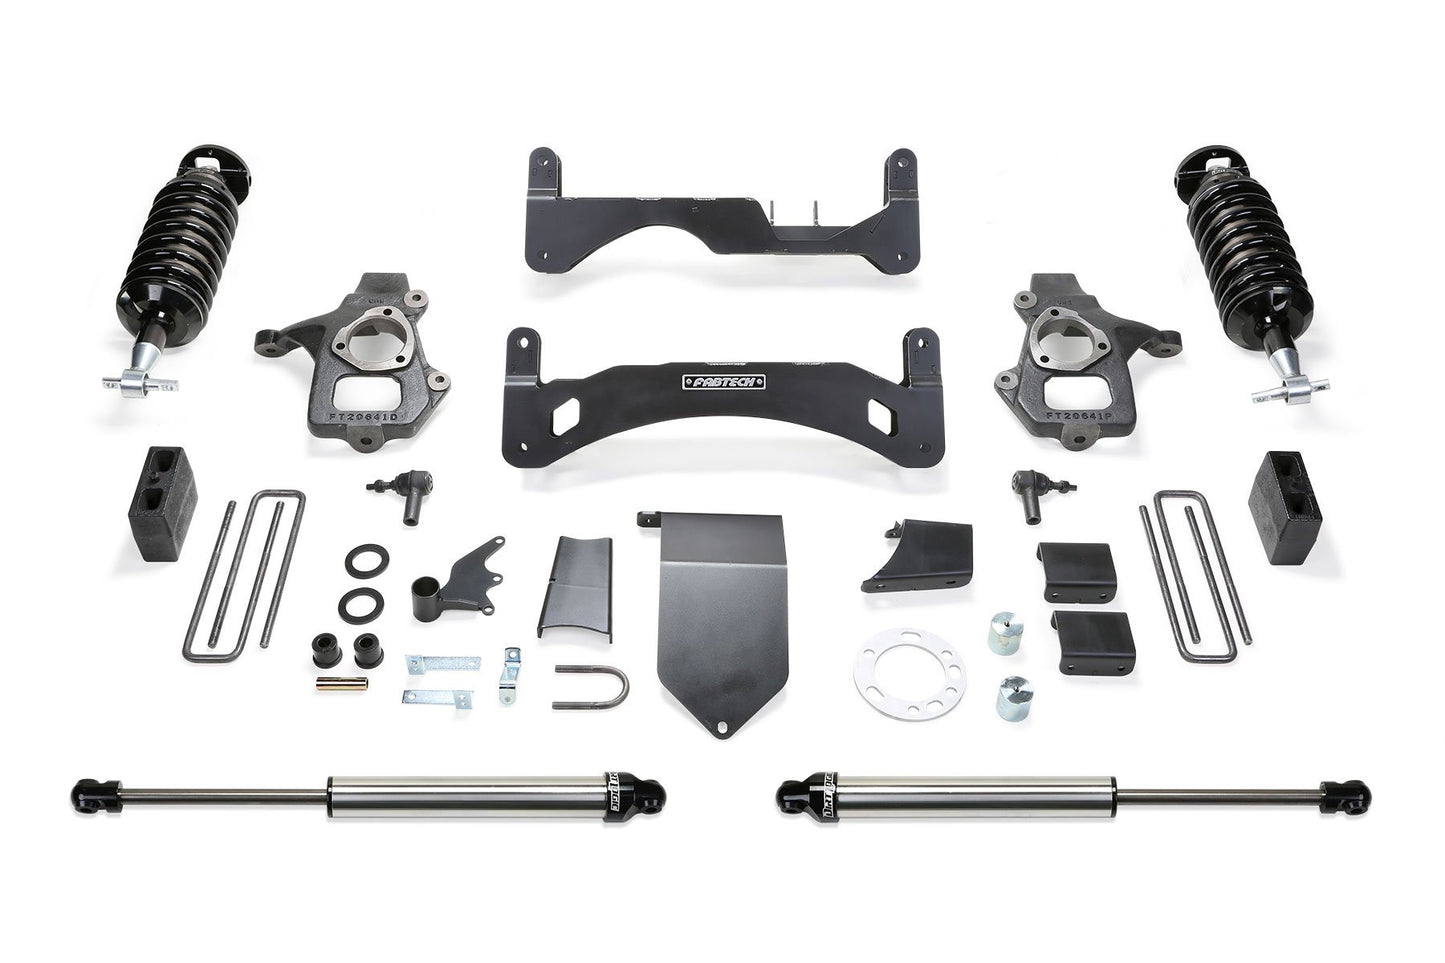 6" PERF SYS G2 W/DL 4.0 & 2.25 14-18 GM C/K 1500 P/U W/ OE FORG STL UCA - 6" PERF SYS G2 W/DL - Fabtech - Texas Complete Truck Center